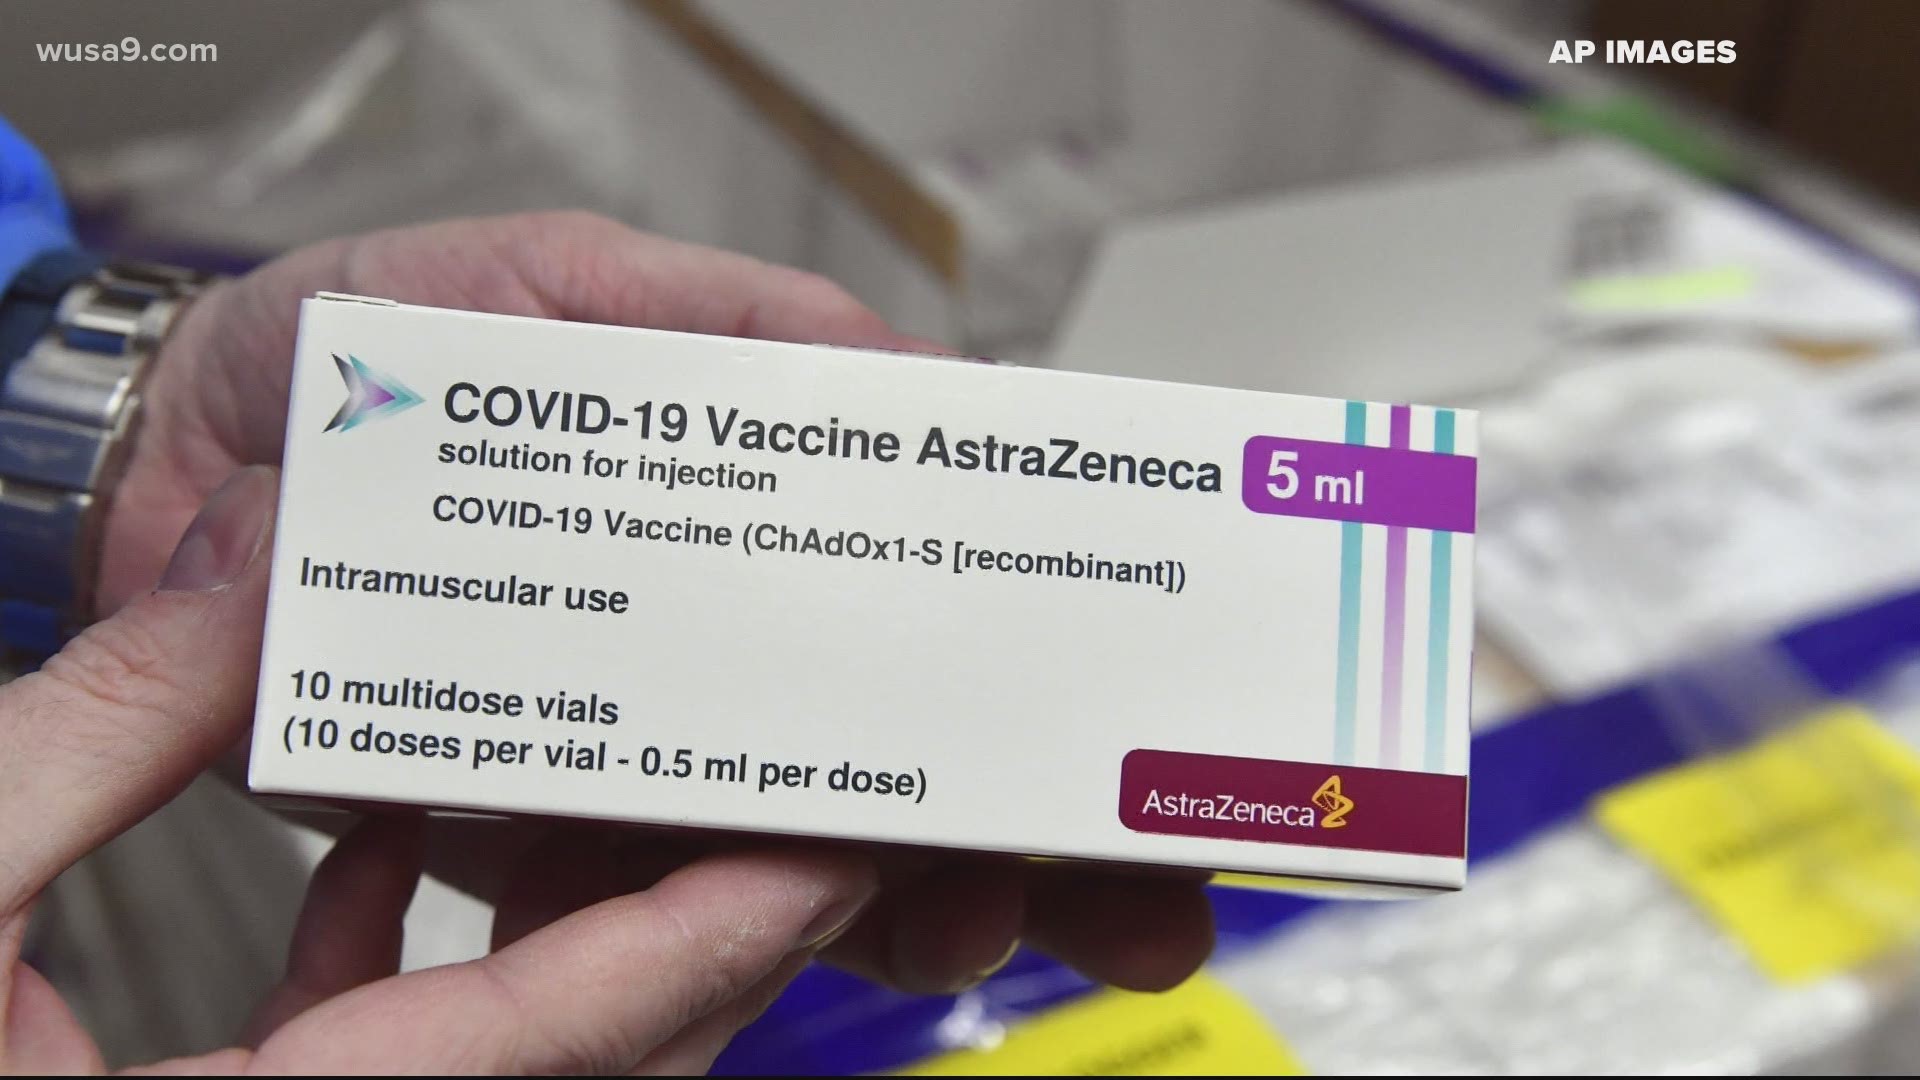 The AstraZeneca vaccine has adjusted efficacy numbers from 79% to 76%.